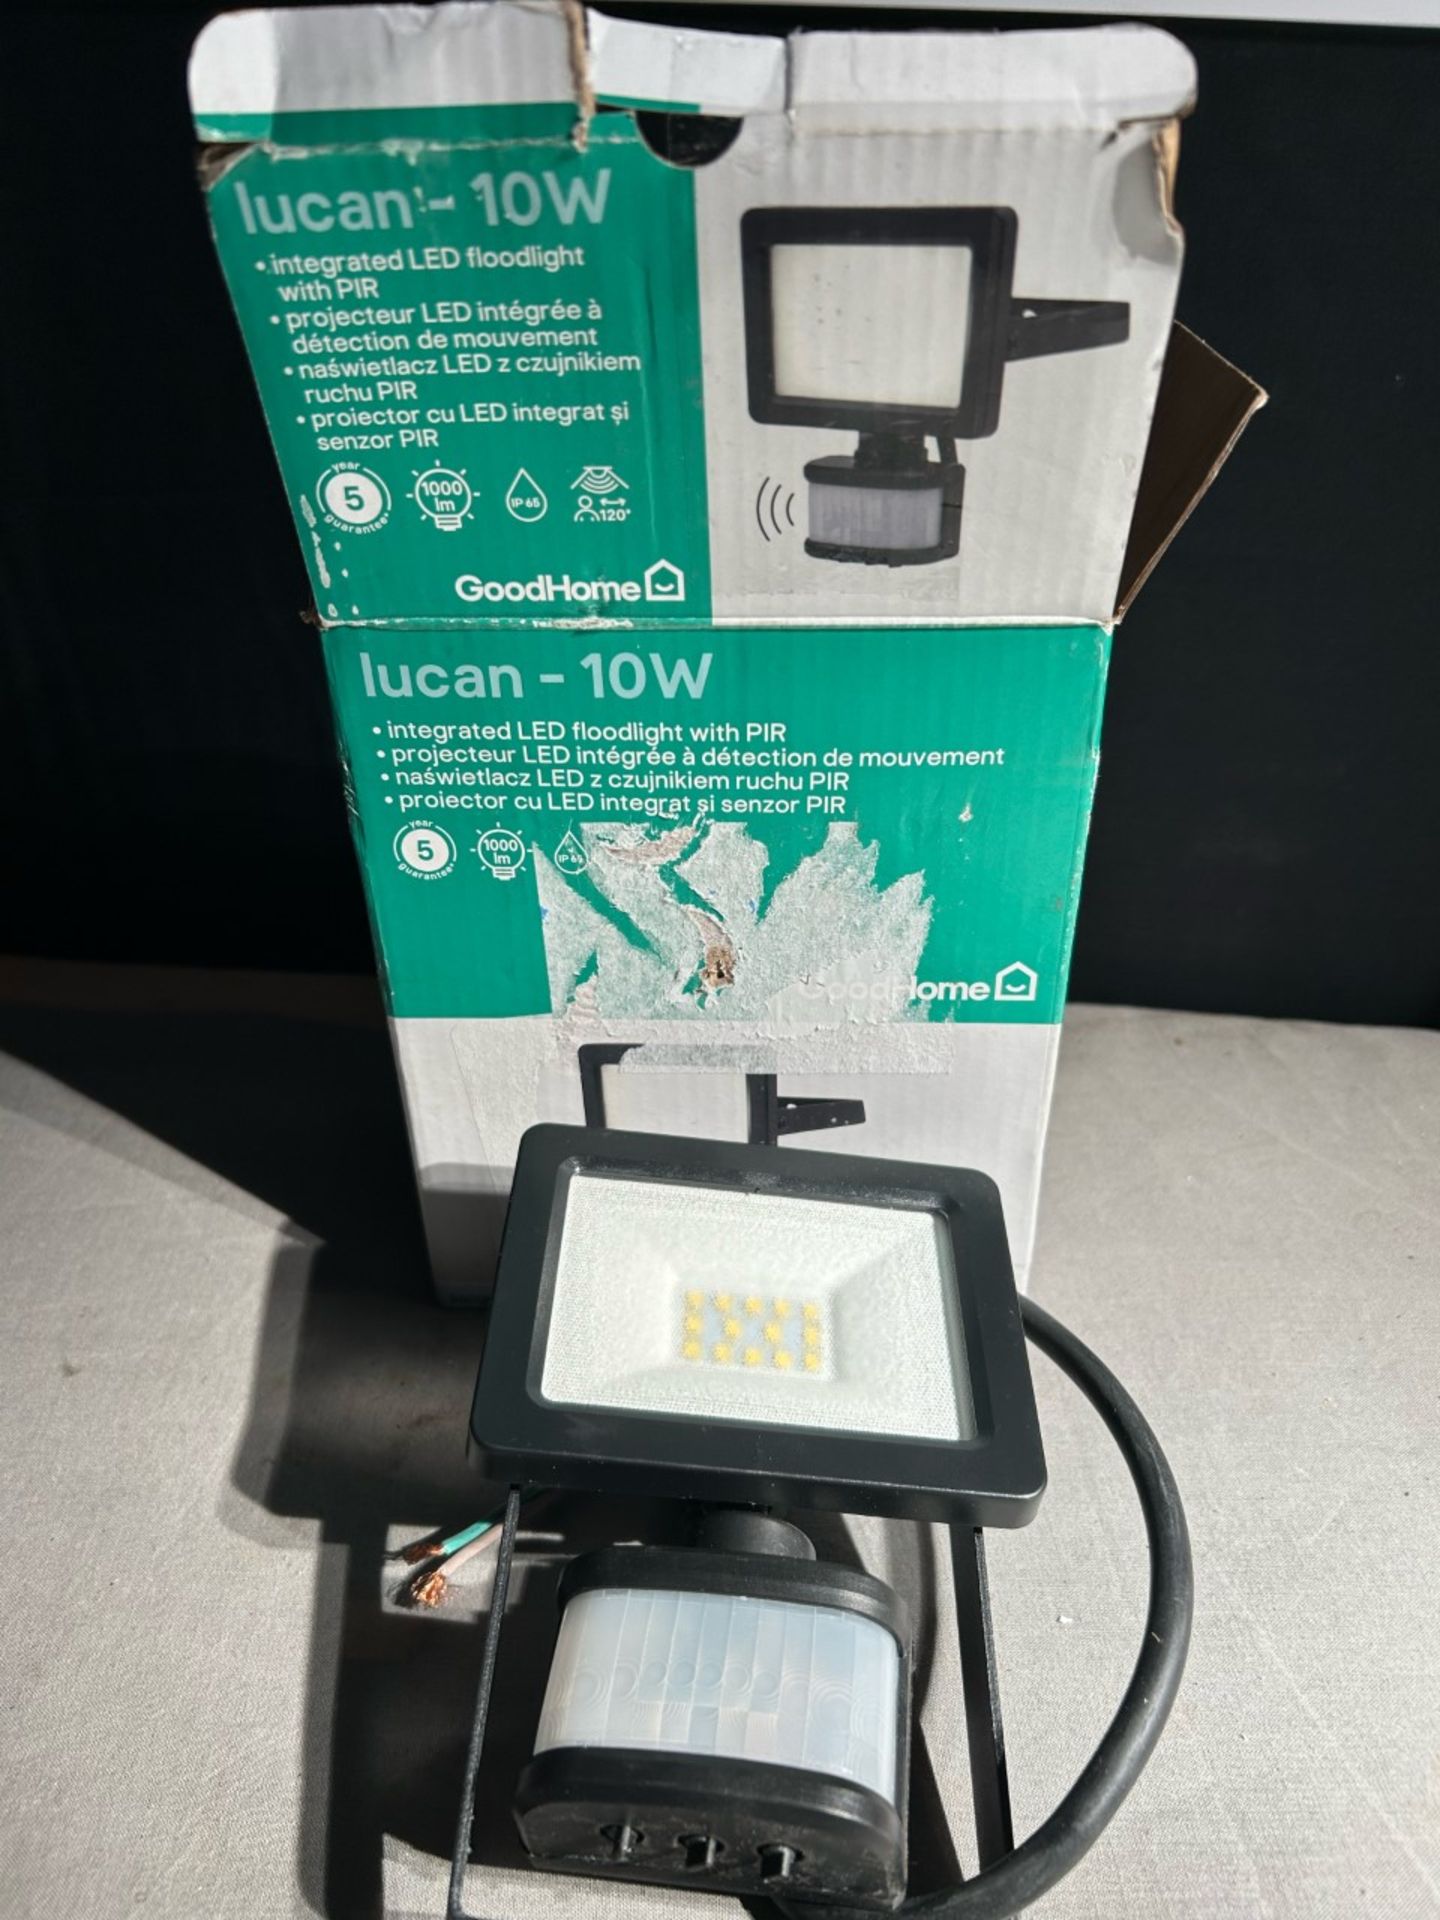 New in box Lucan 10W intergrated floodlight